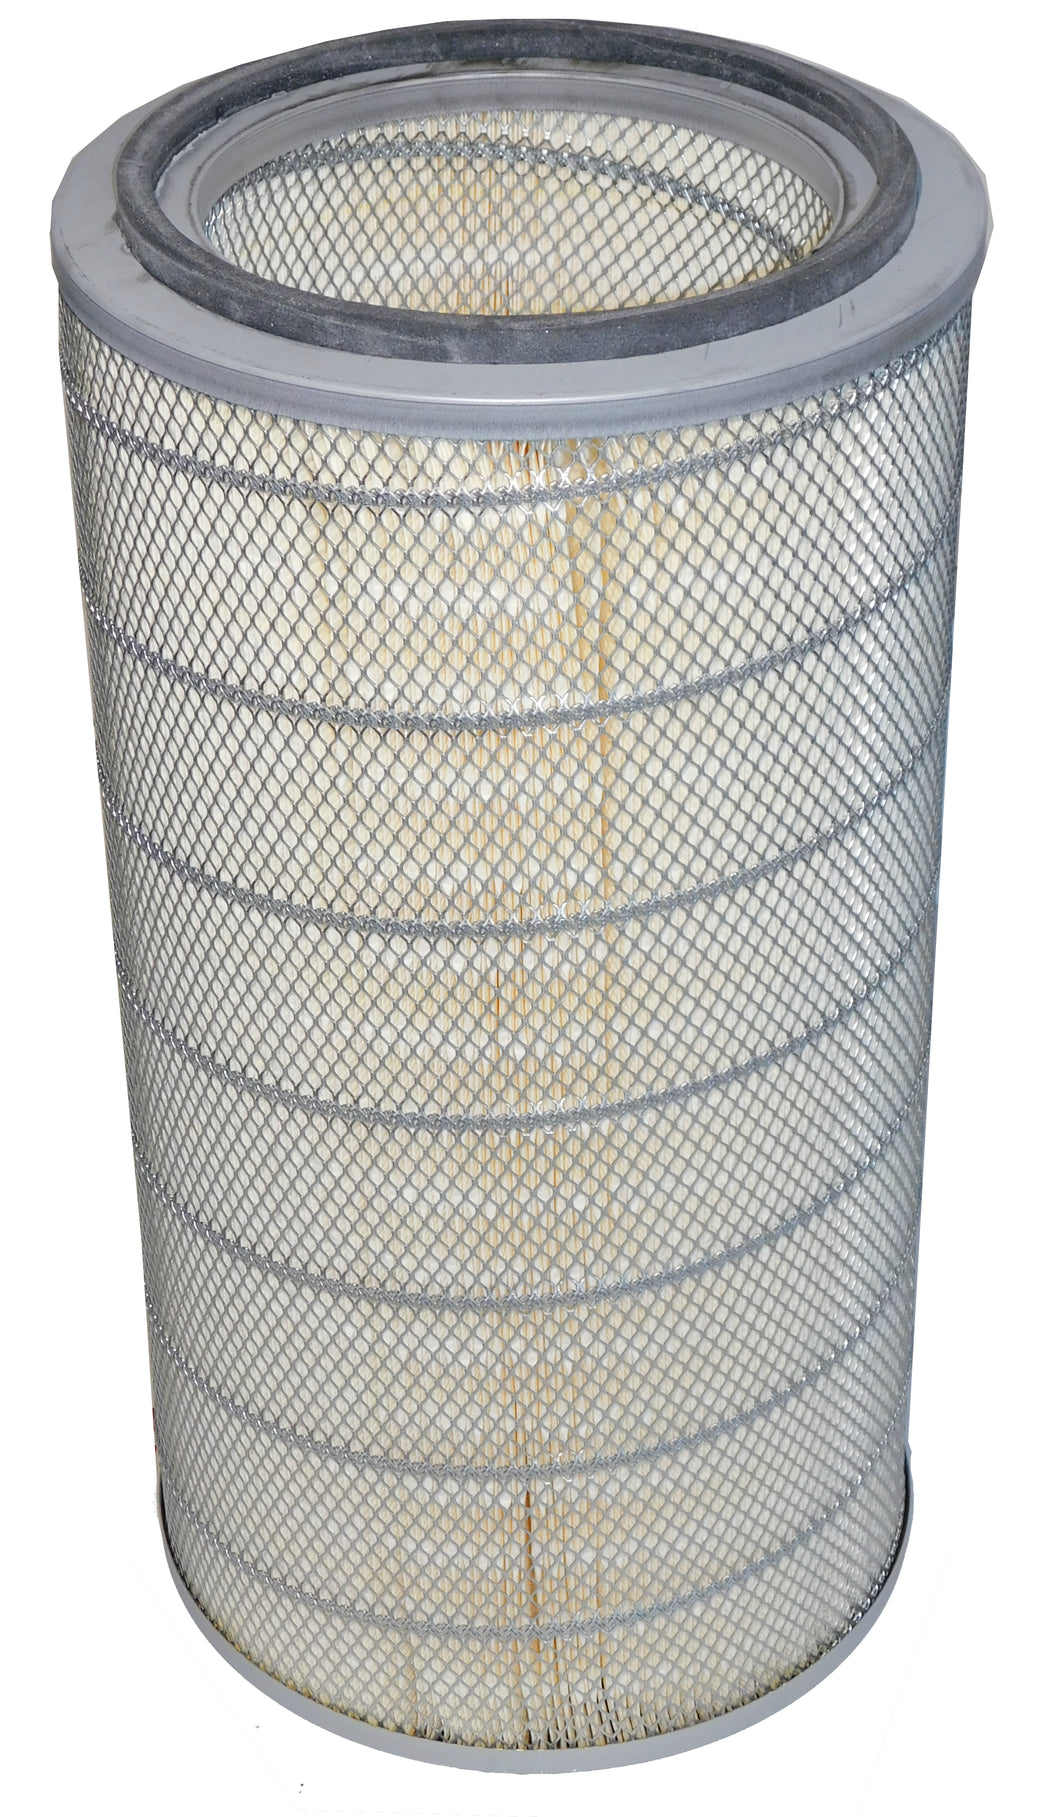 CB261-1335 - Casco - OEM Replacement Filter